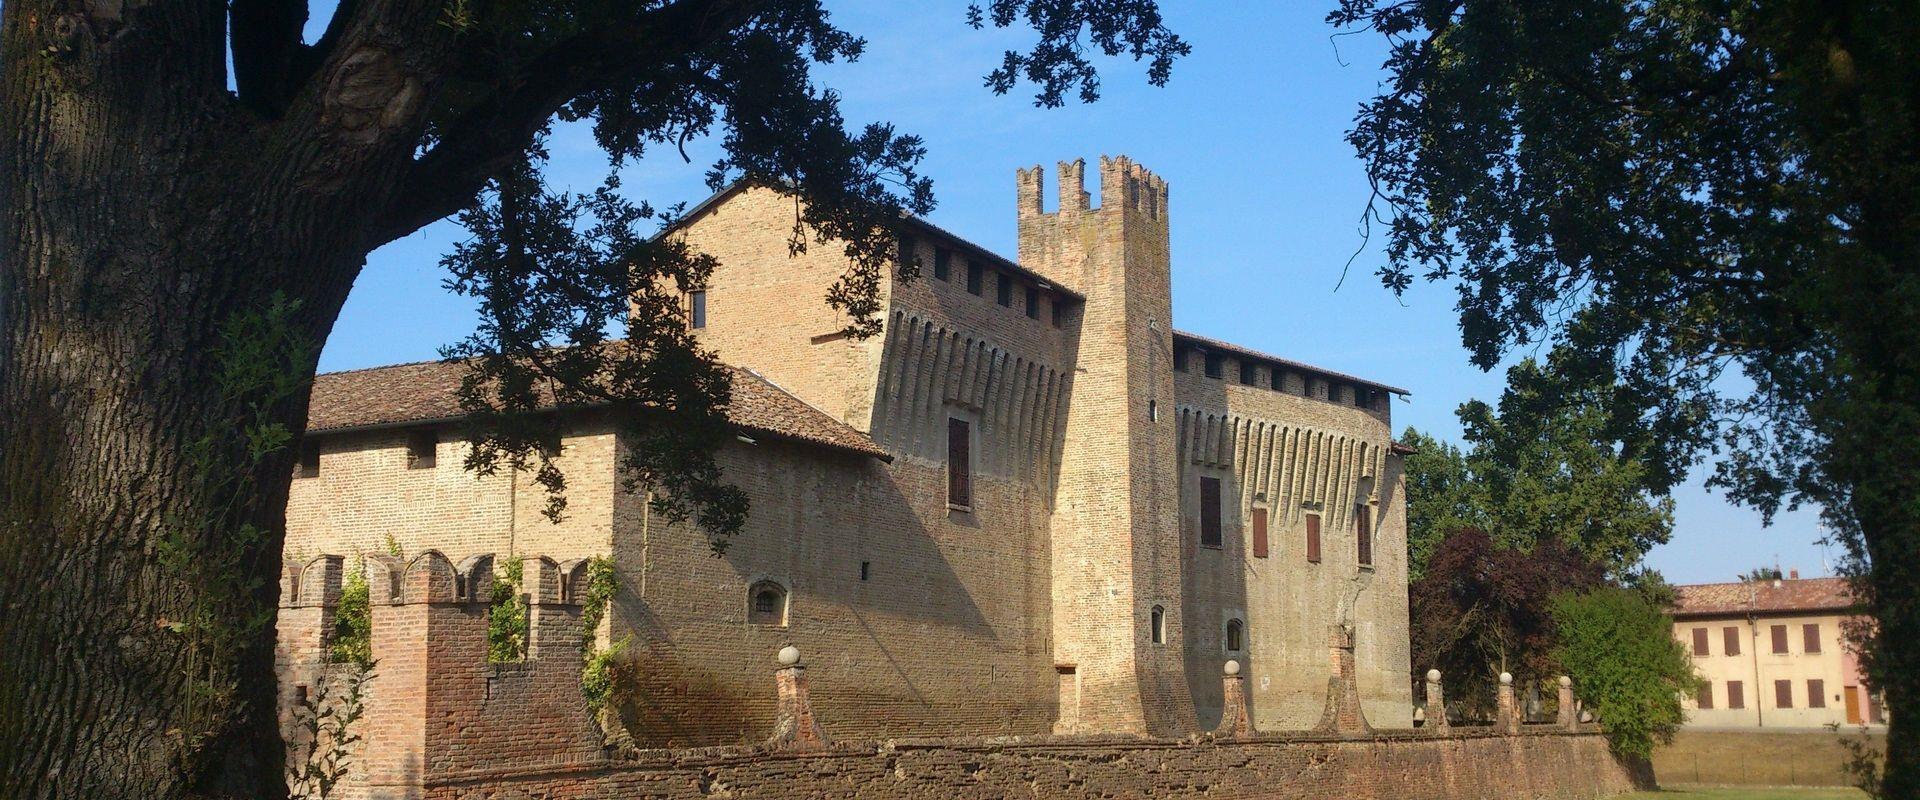 Discover Piacenza, its hills and the many castles and well-preserved fortresses: choose Best Western Park Hotel as your starting point!